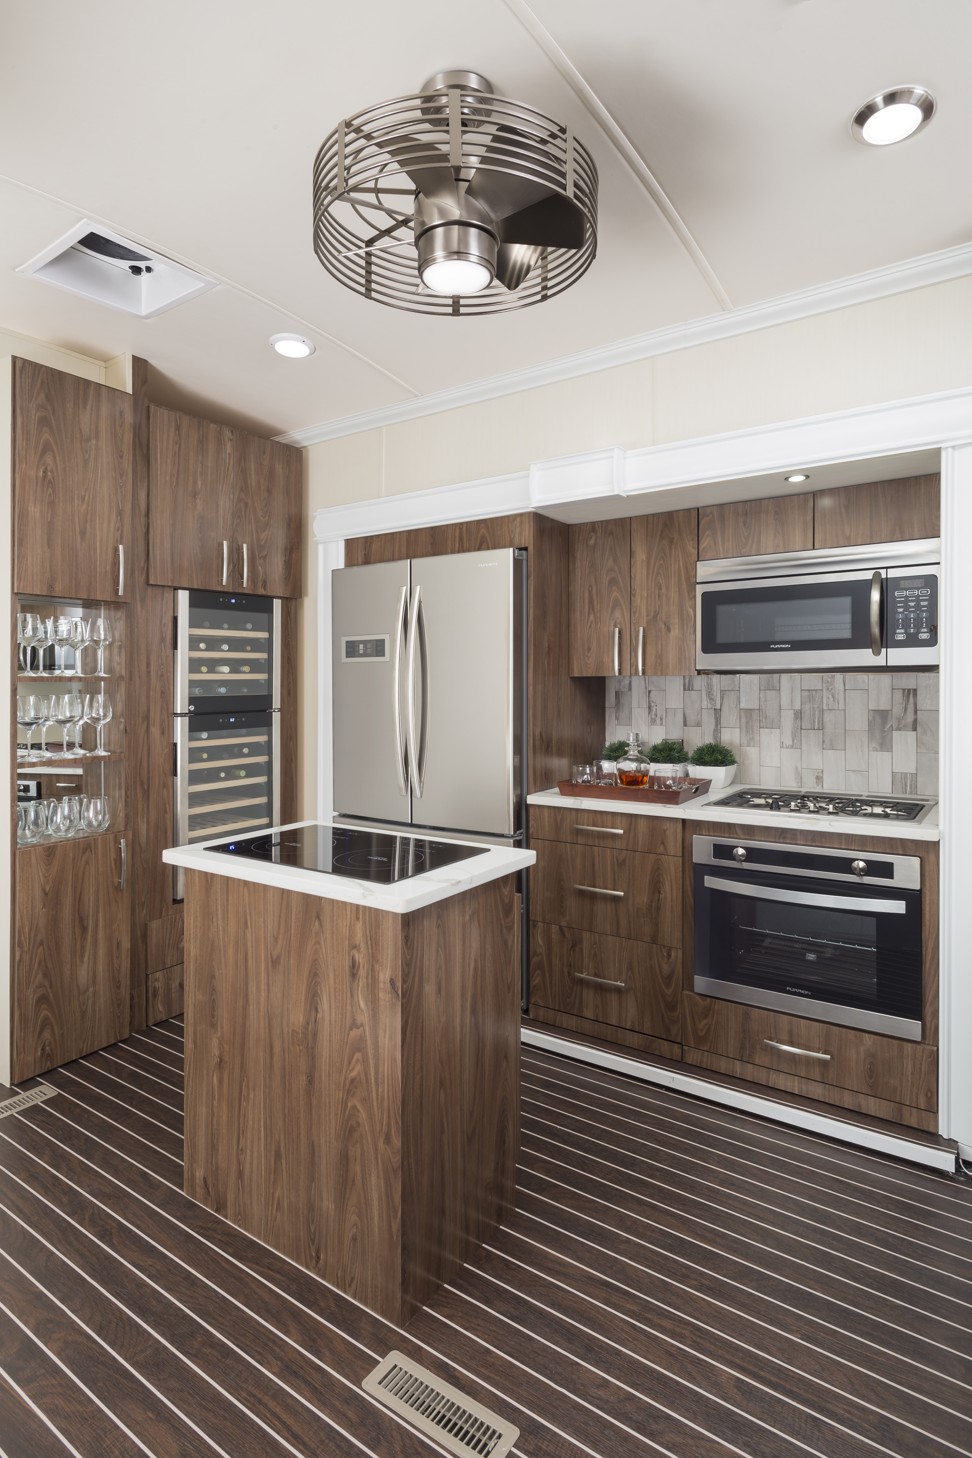 The kitchen inside the Limitless luxury RV.